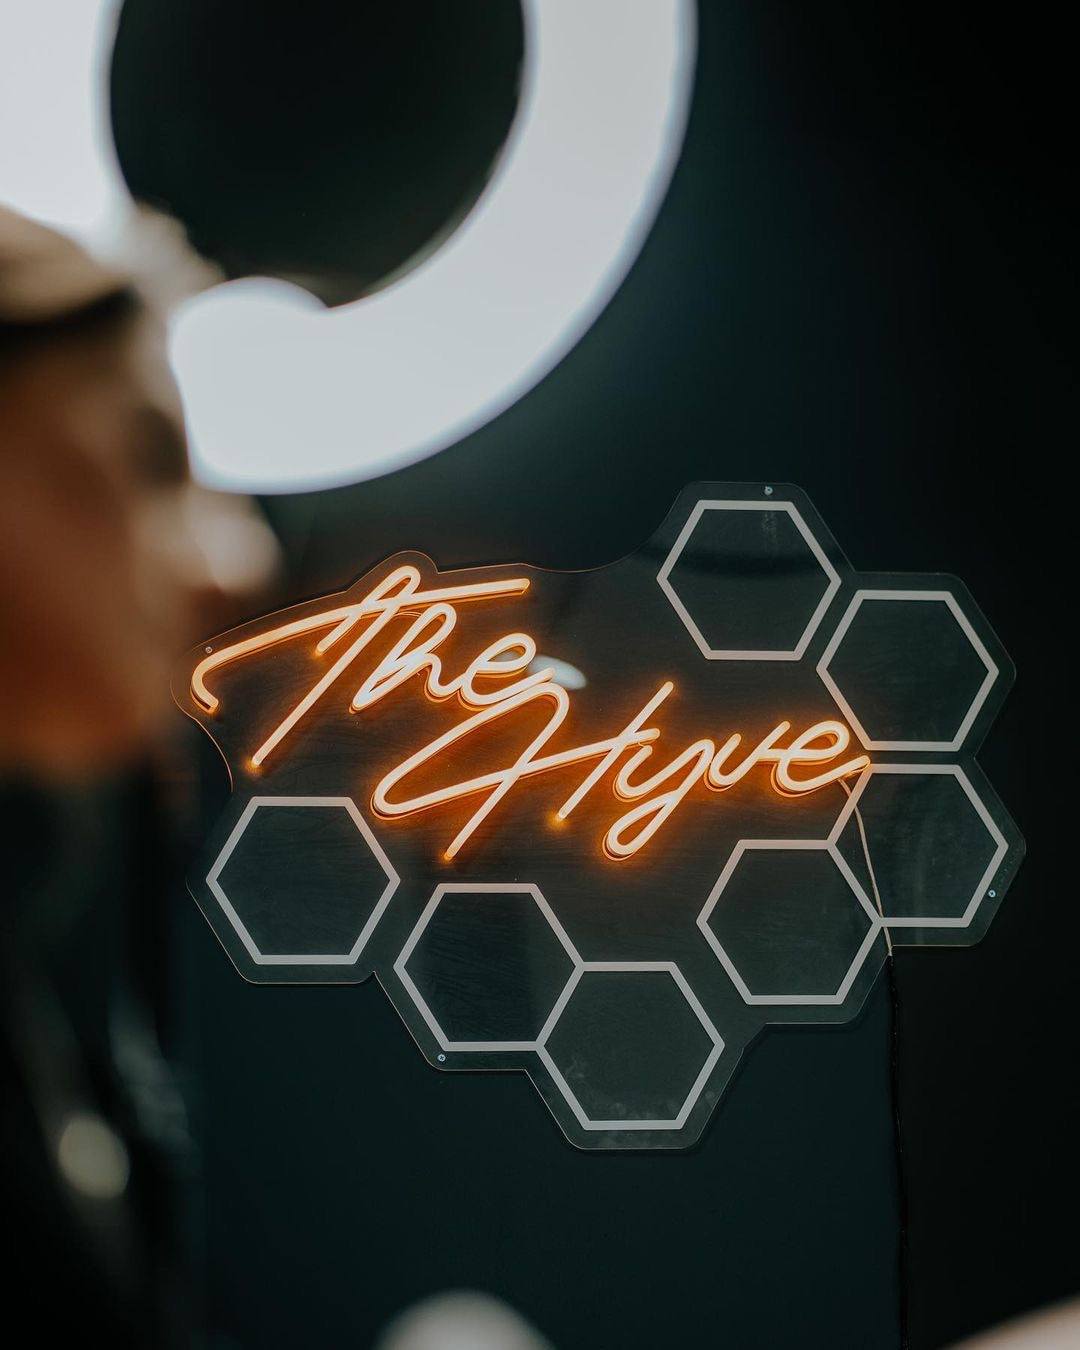 The hyve tattoo custom neon sign in new westminster british columbia